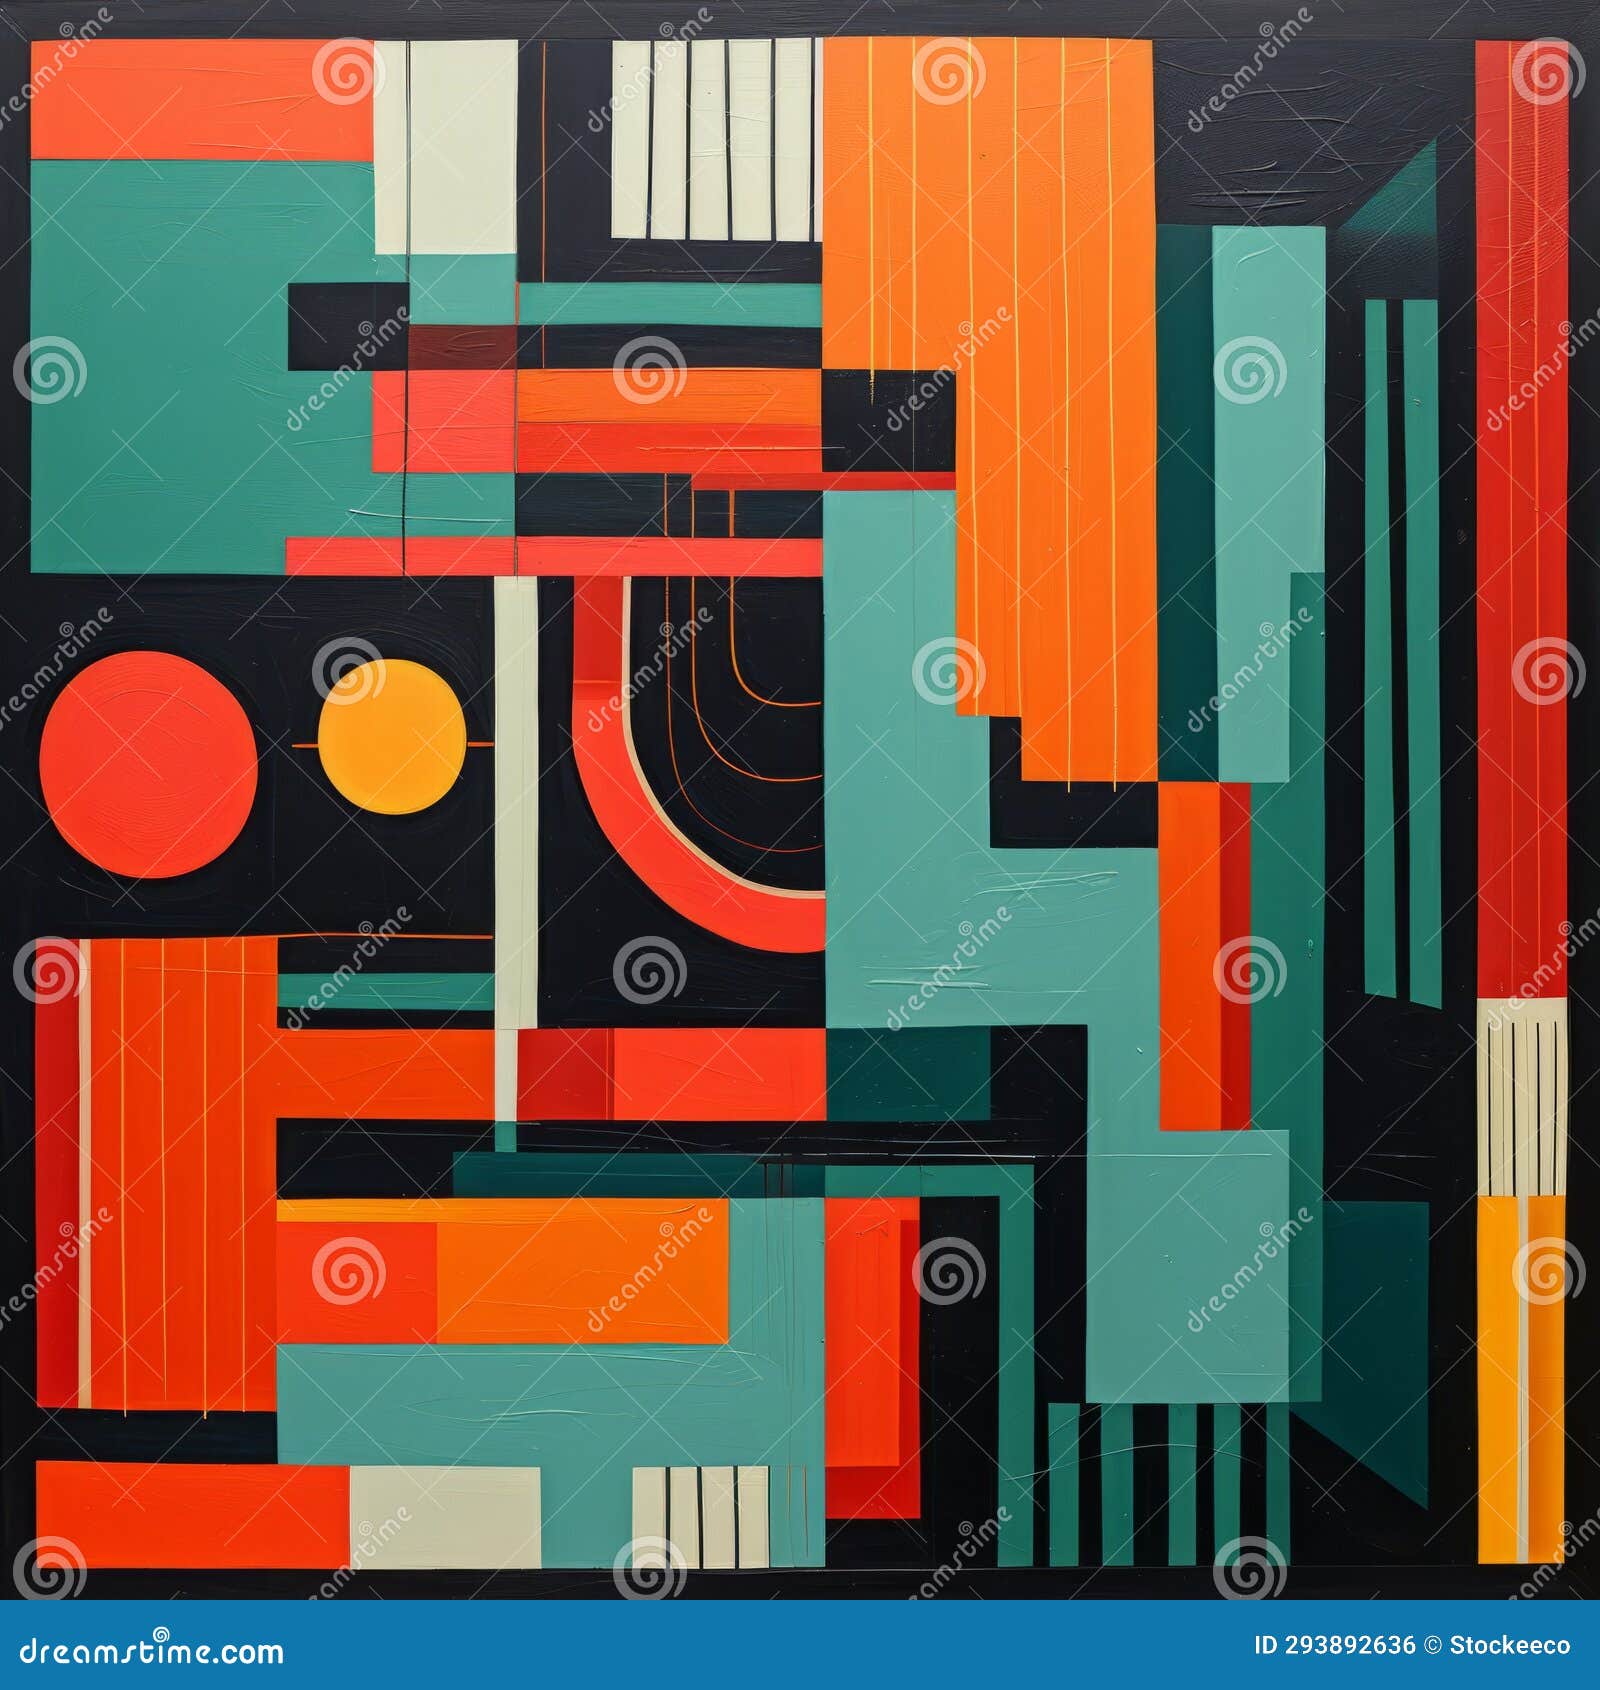 colorful abstract painting with large orange and green squares